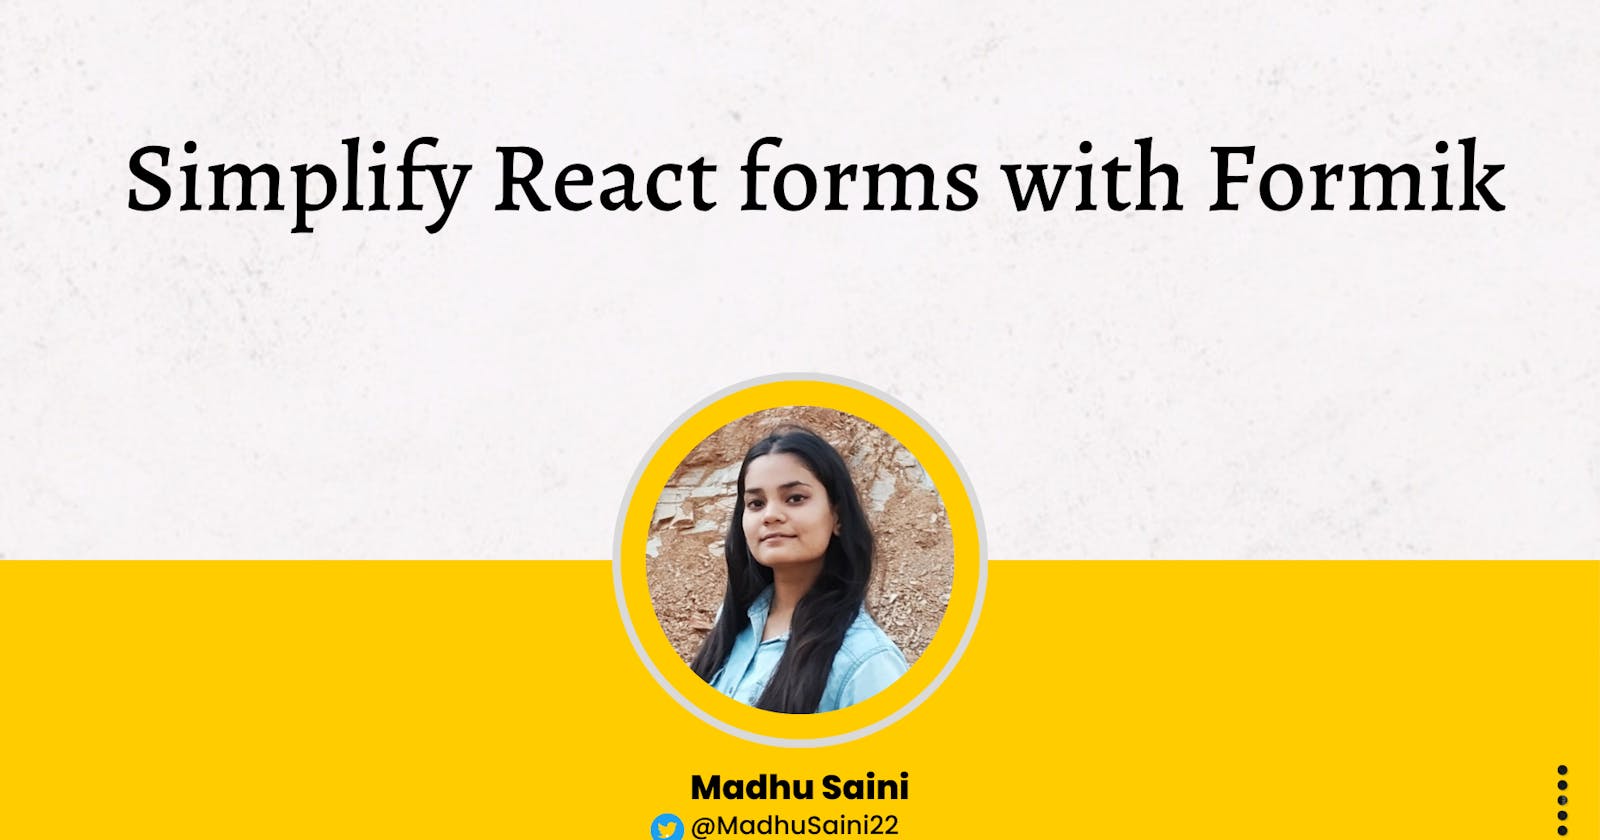 Simplify your react forms with Formik